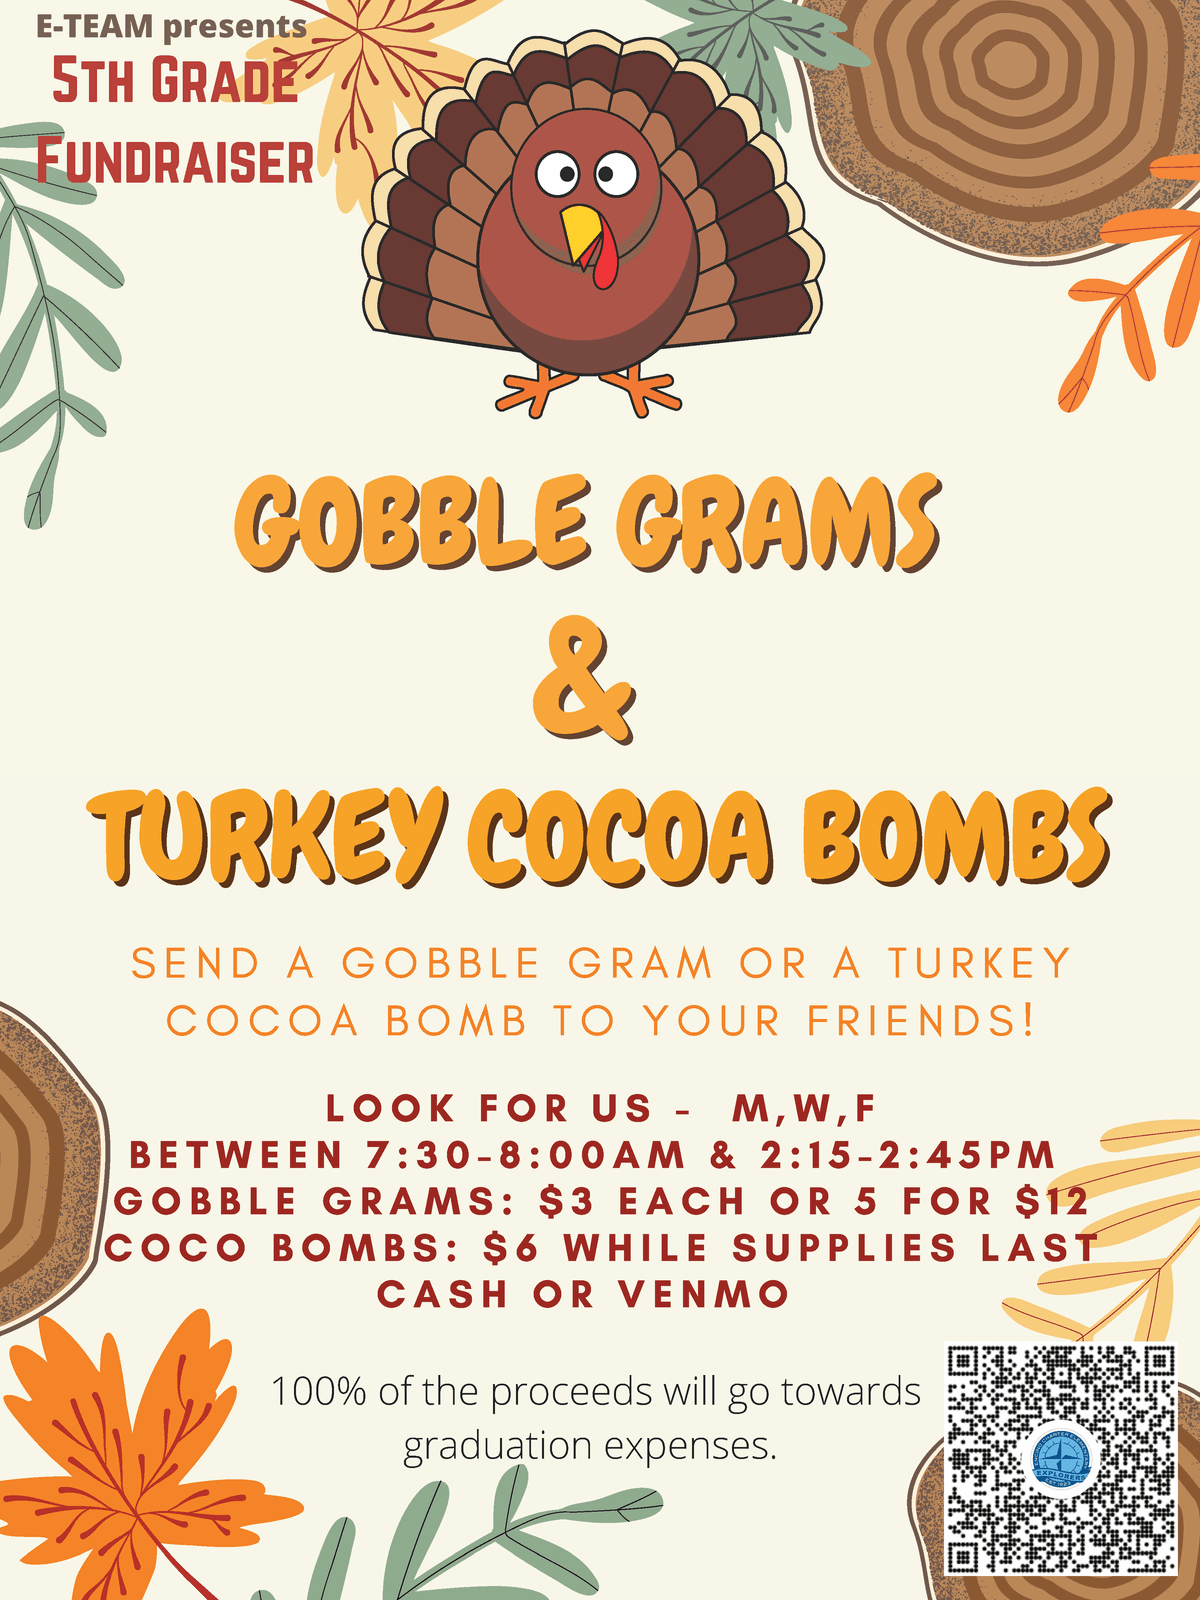 Gobble Grams 20212022Events Events Encino Charter Elementary ETeam